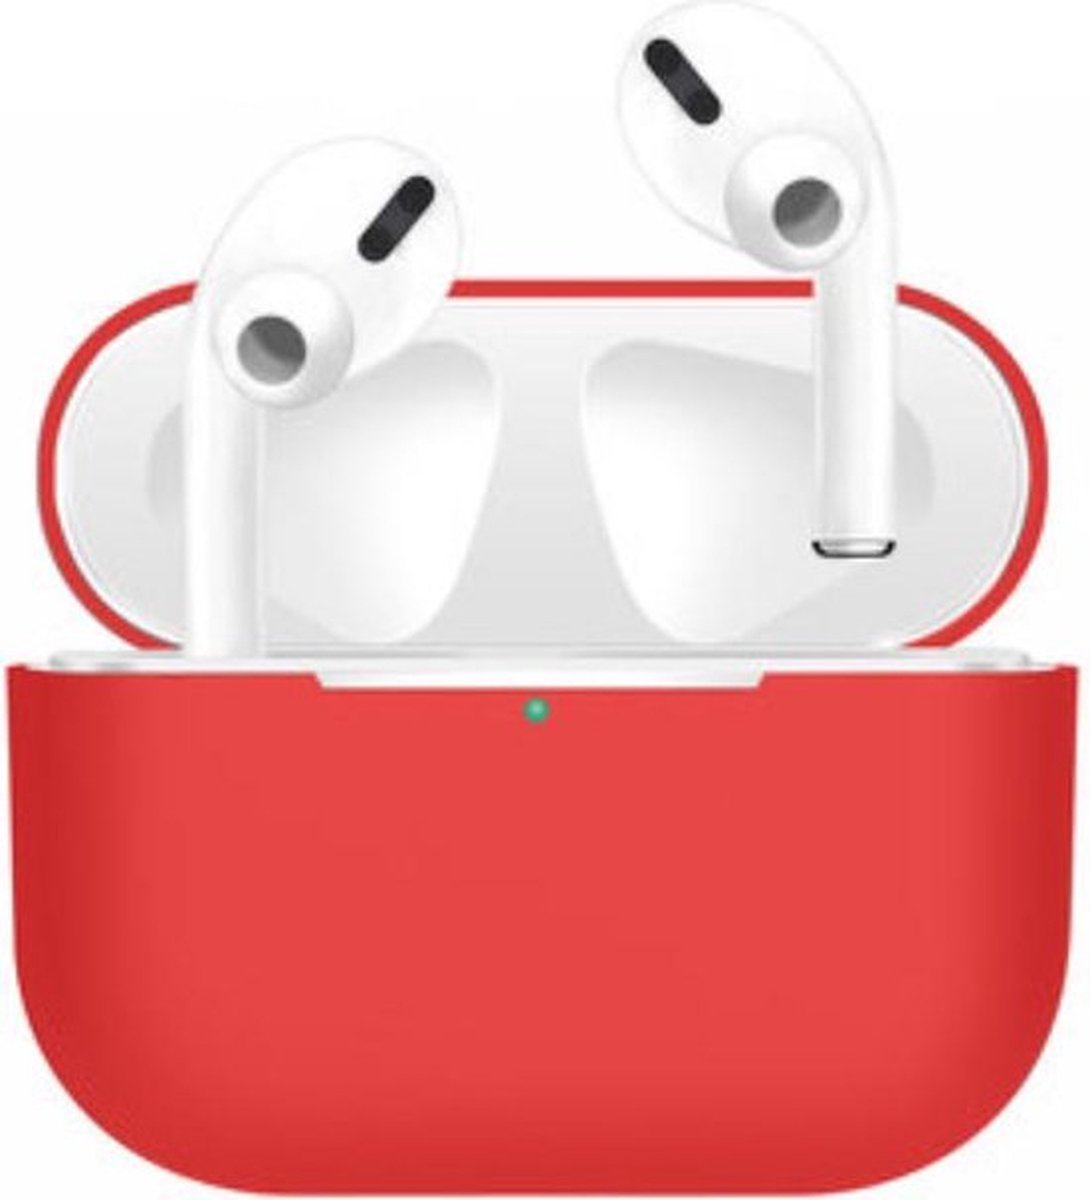 Apple AirPods Pro - Siliconen Case Cover - Hoesje voor AirPods - Geschikt voor AirPods Pro - Eendelig - Kleur Rood